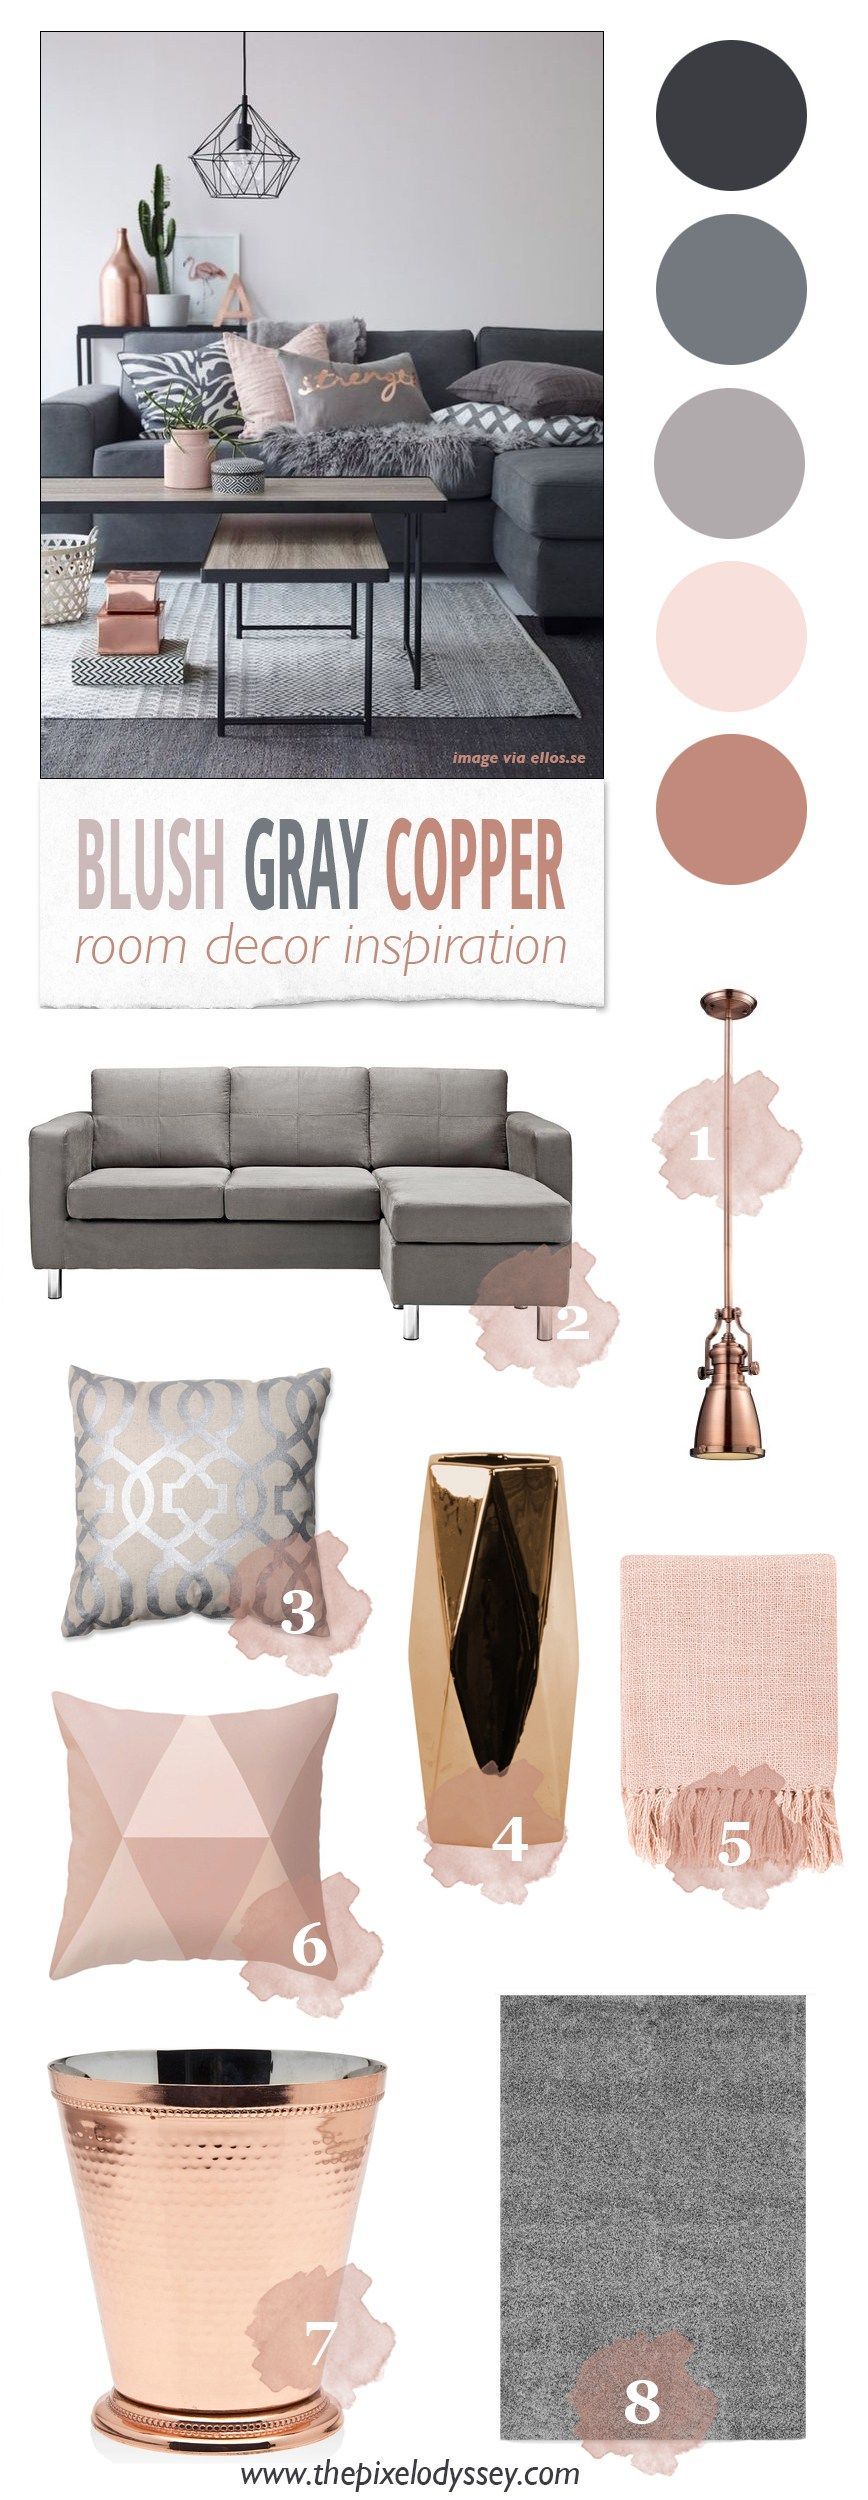 Blush Gray Copper Room Decor Inspiration – The Pixel Odyssey // visit our sister s